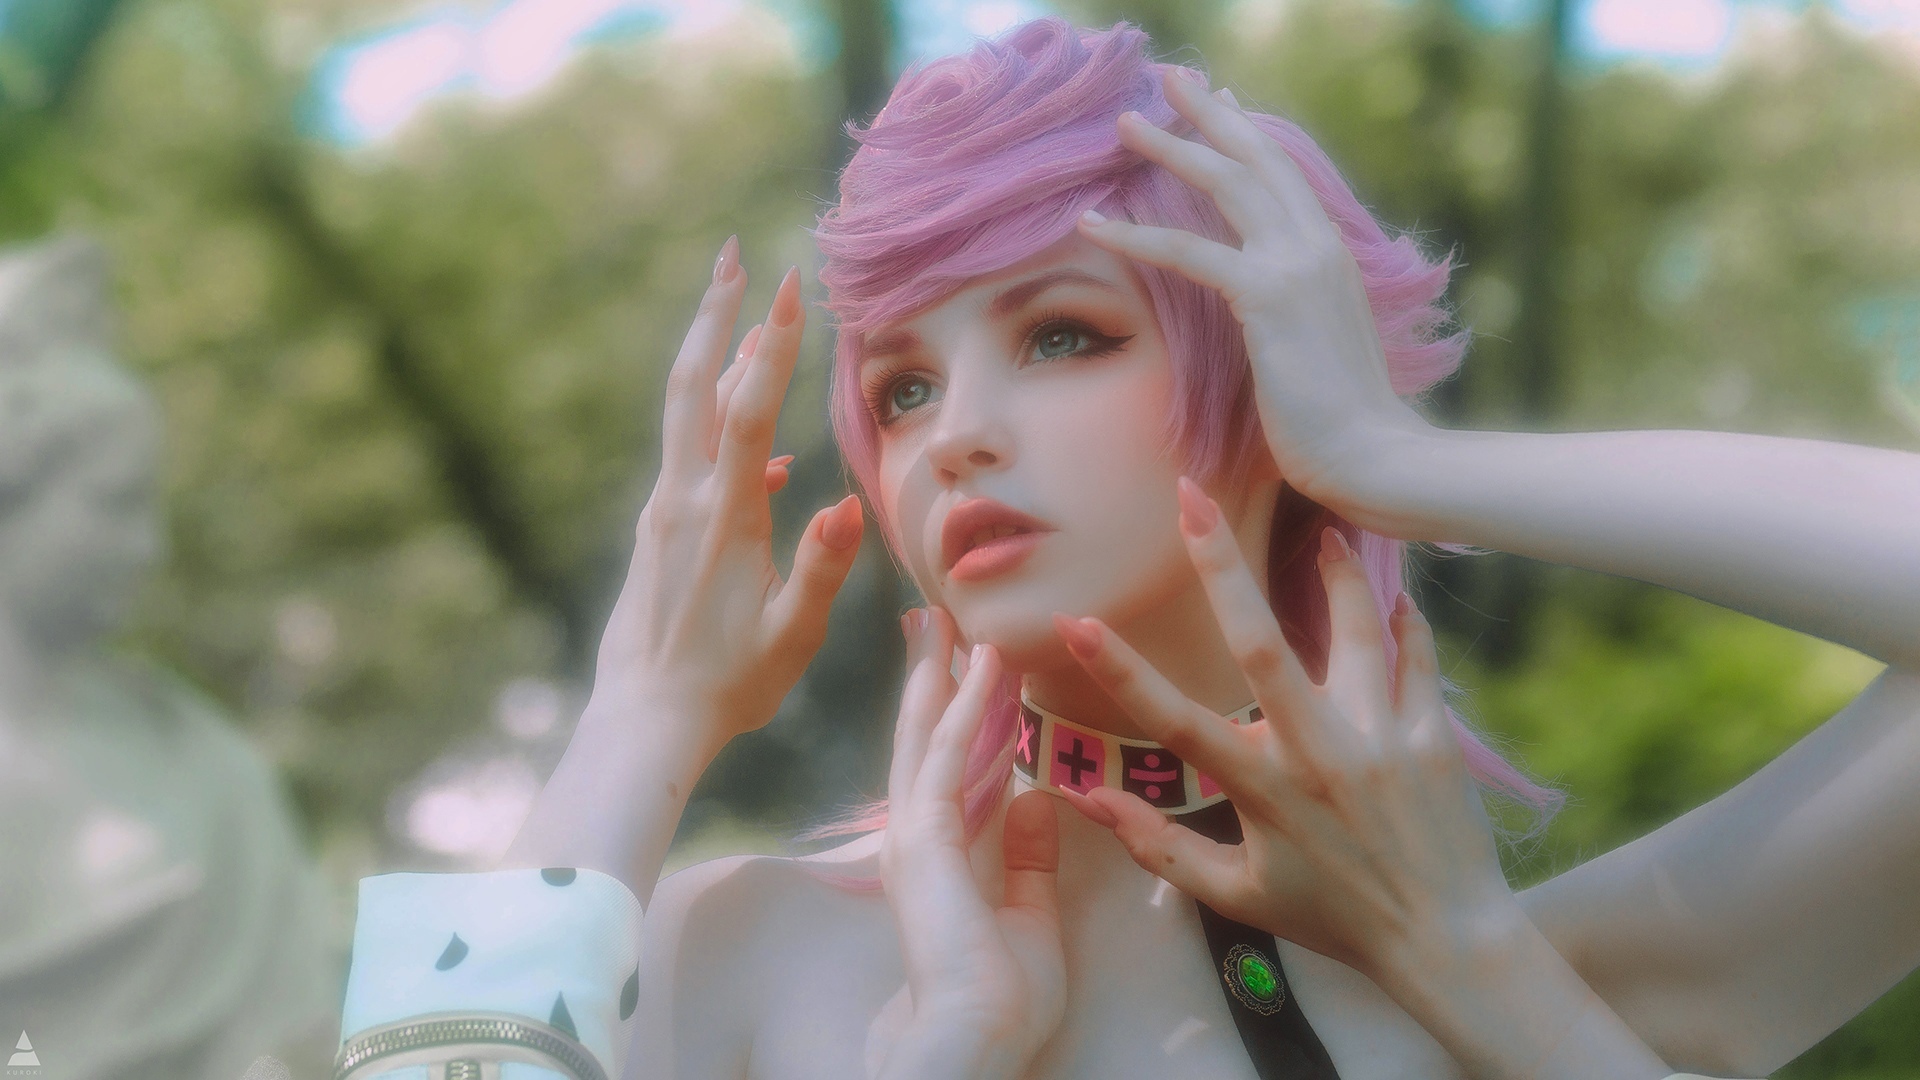 Women Pink Hair Eyeliner Hands Portrait Dyed Hair Cosplay Painted Nails Looking Away 1920x1080